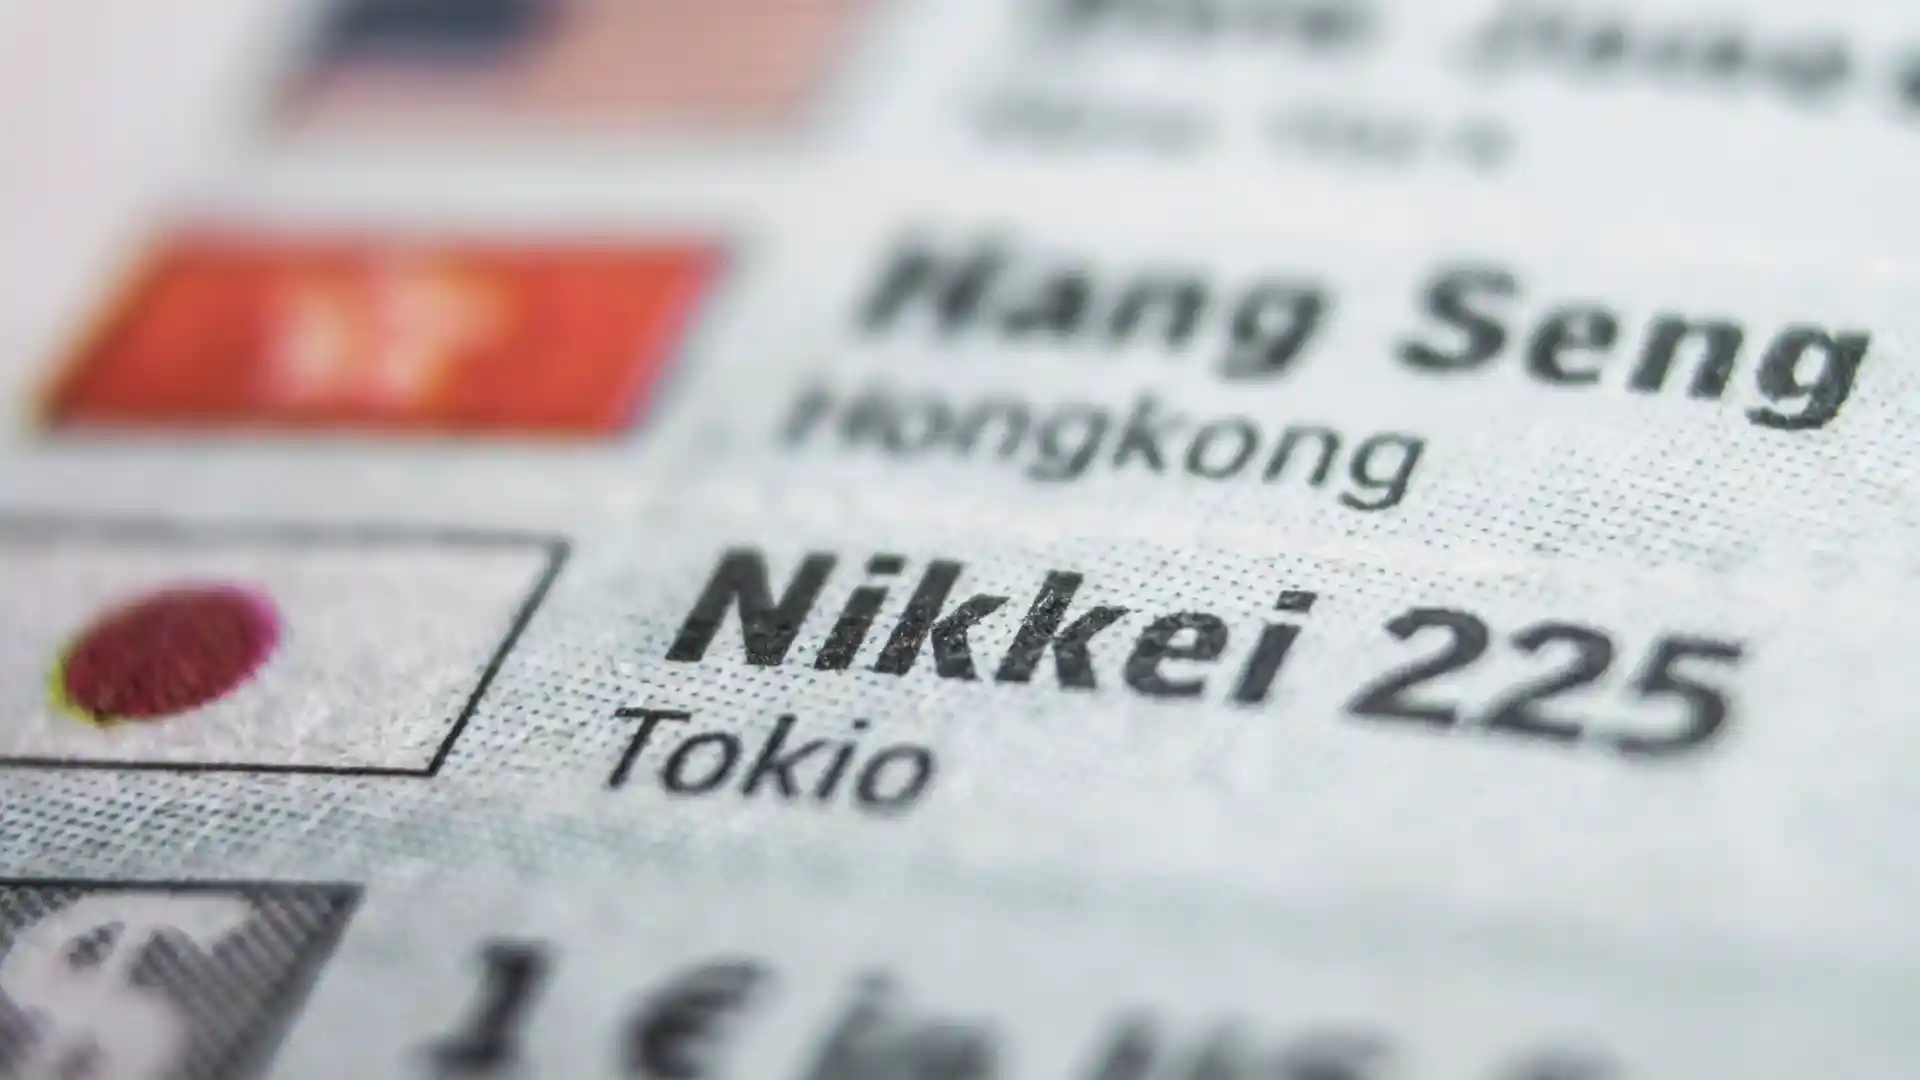 Nikkei 225 Surges Past 41,000 as Japan Inflation Rises, Retreats Later